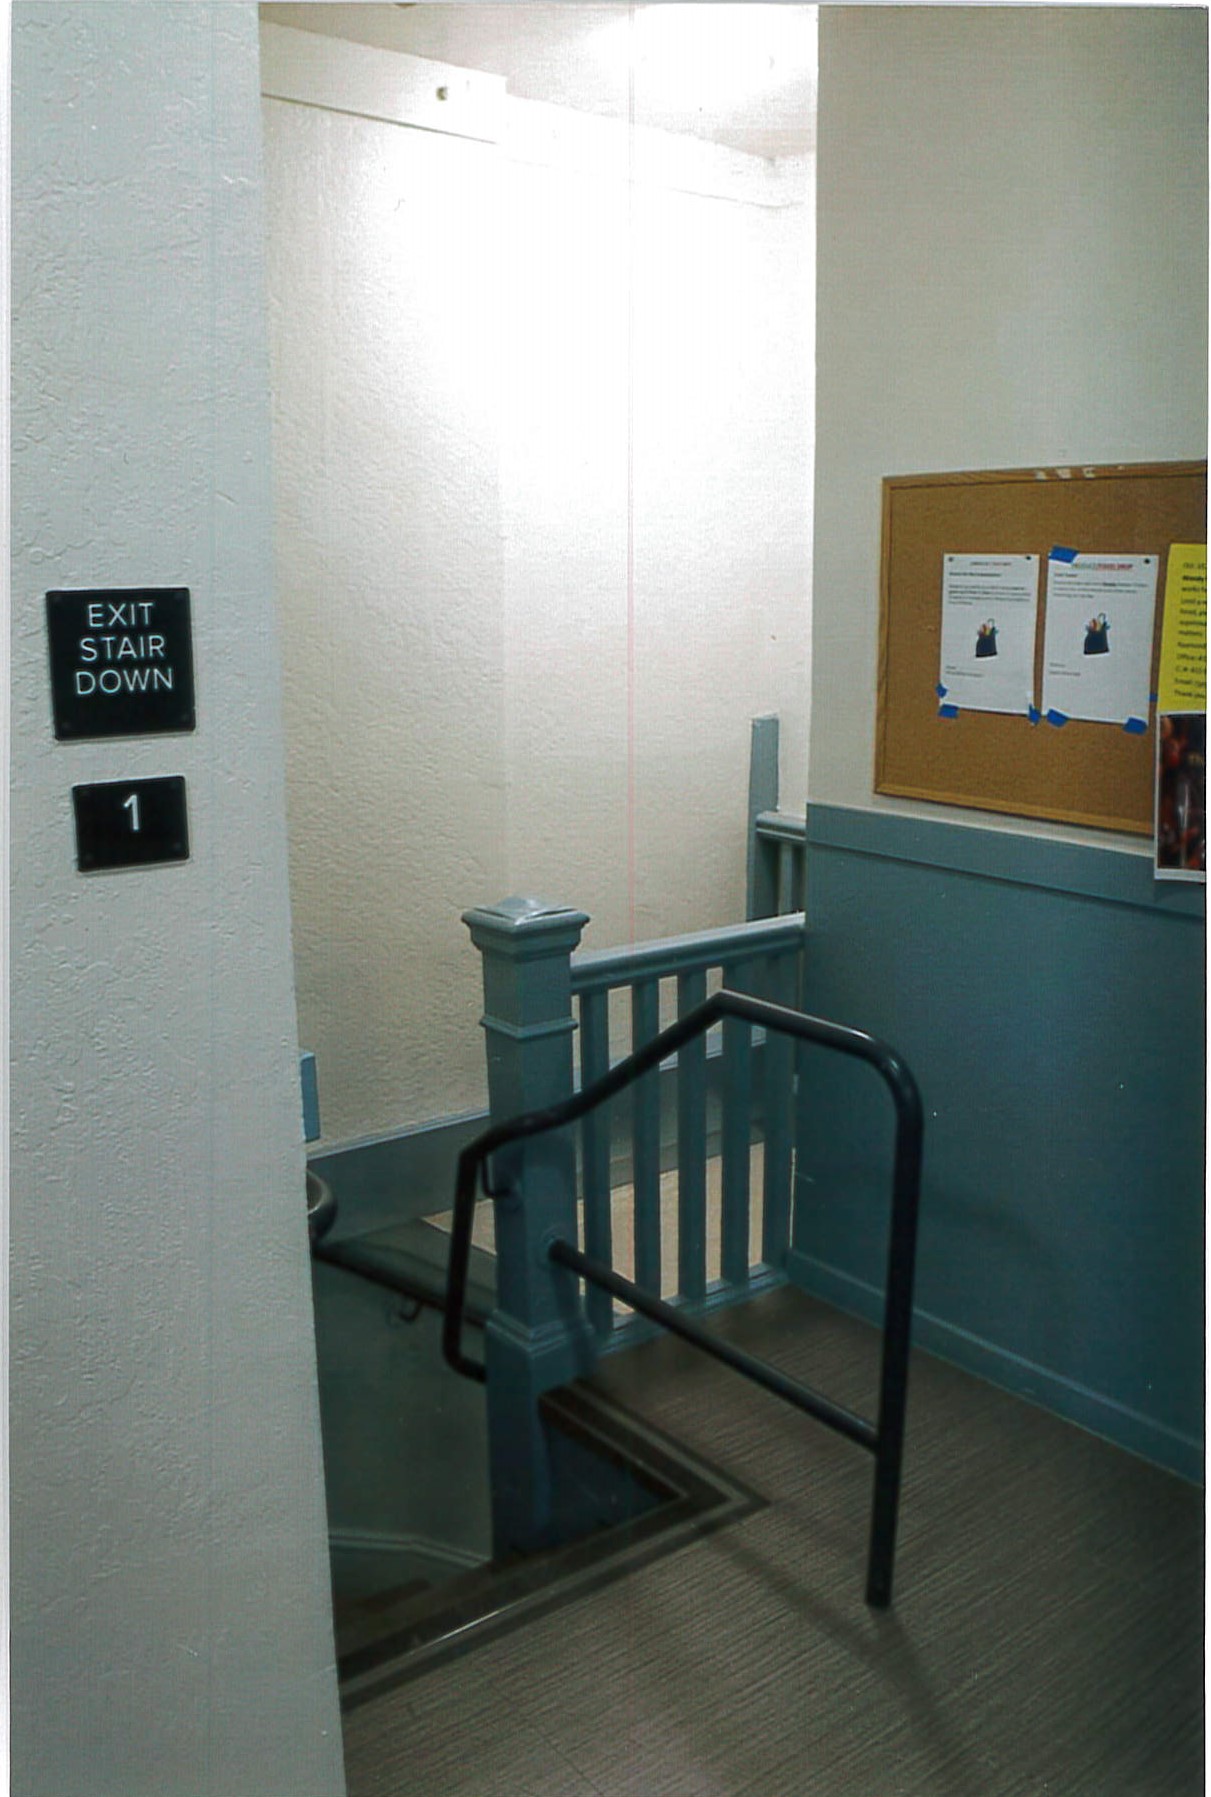 Lobby stairs to lower level, added safety railing